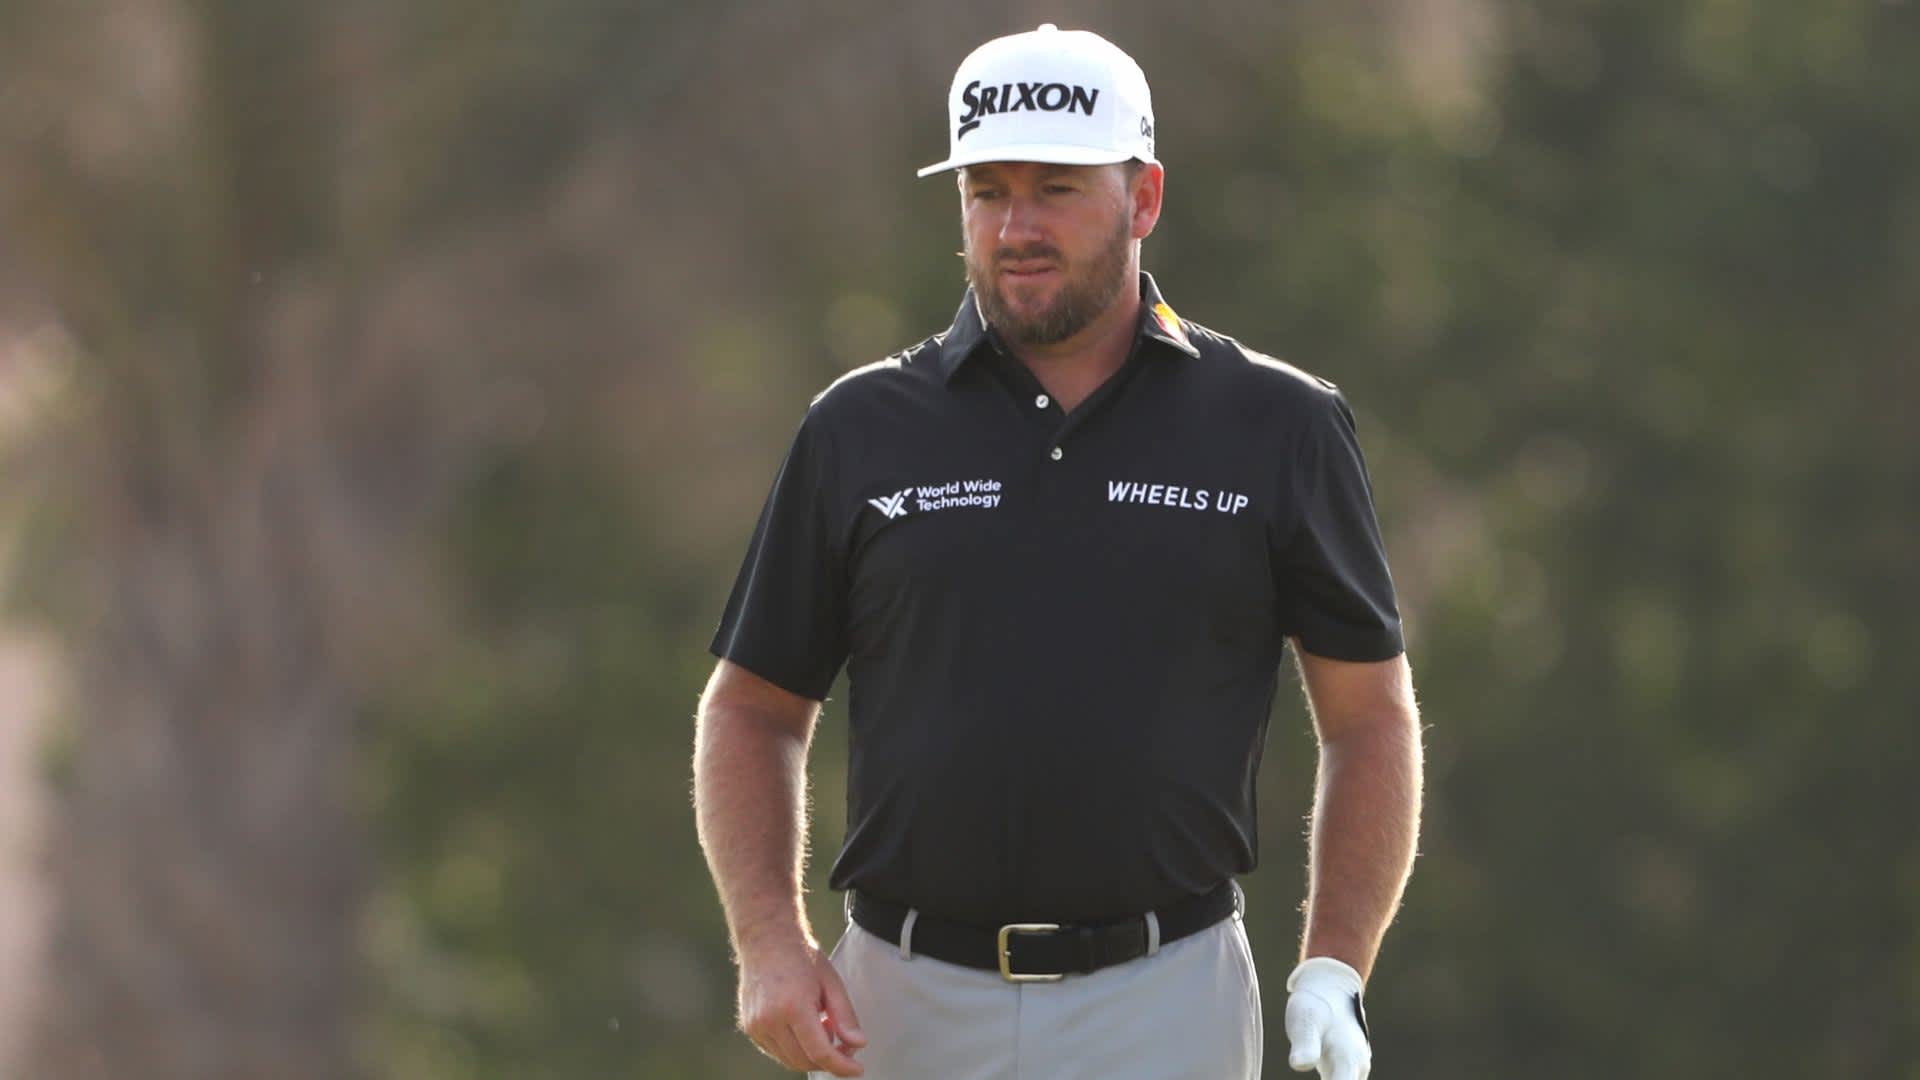 PGA Tour: Graeme McDowell at T18 at the Waste Management Phoenix Open after the first round